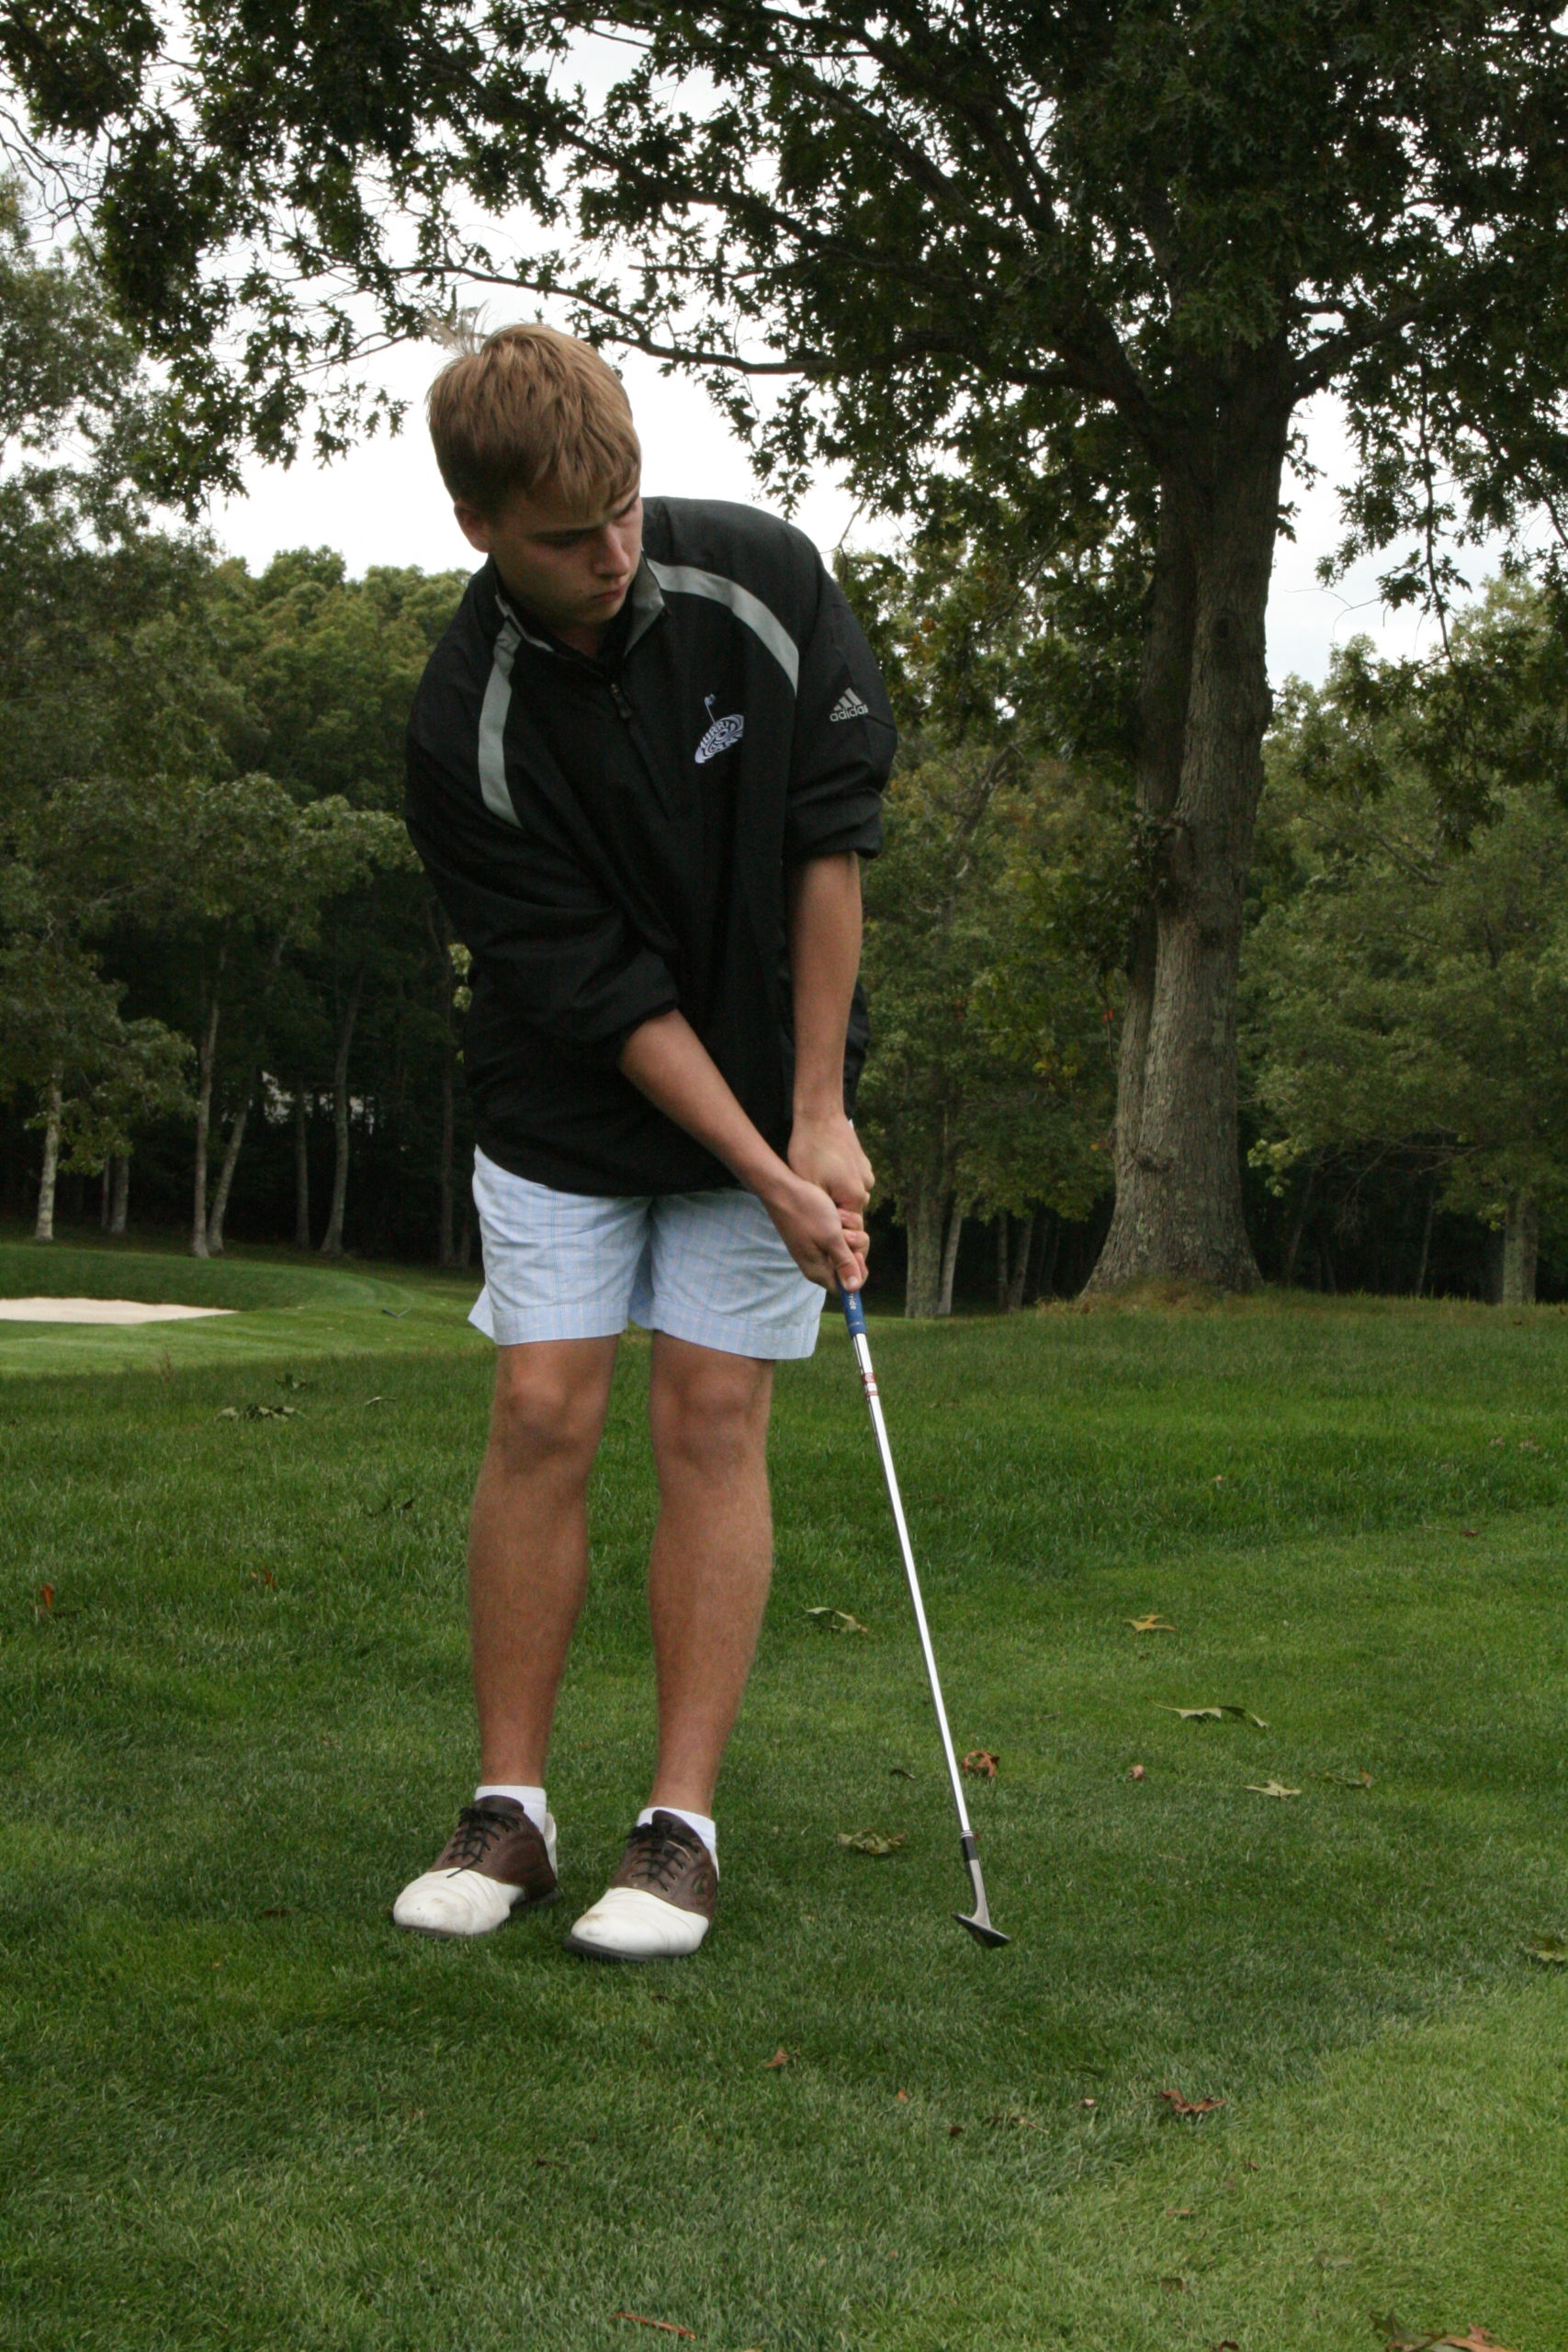 C.J. Andrews was a key golfer for Westhampton Beach, playing on the varsity team as an eighth grader and through into his high school years.